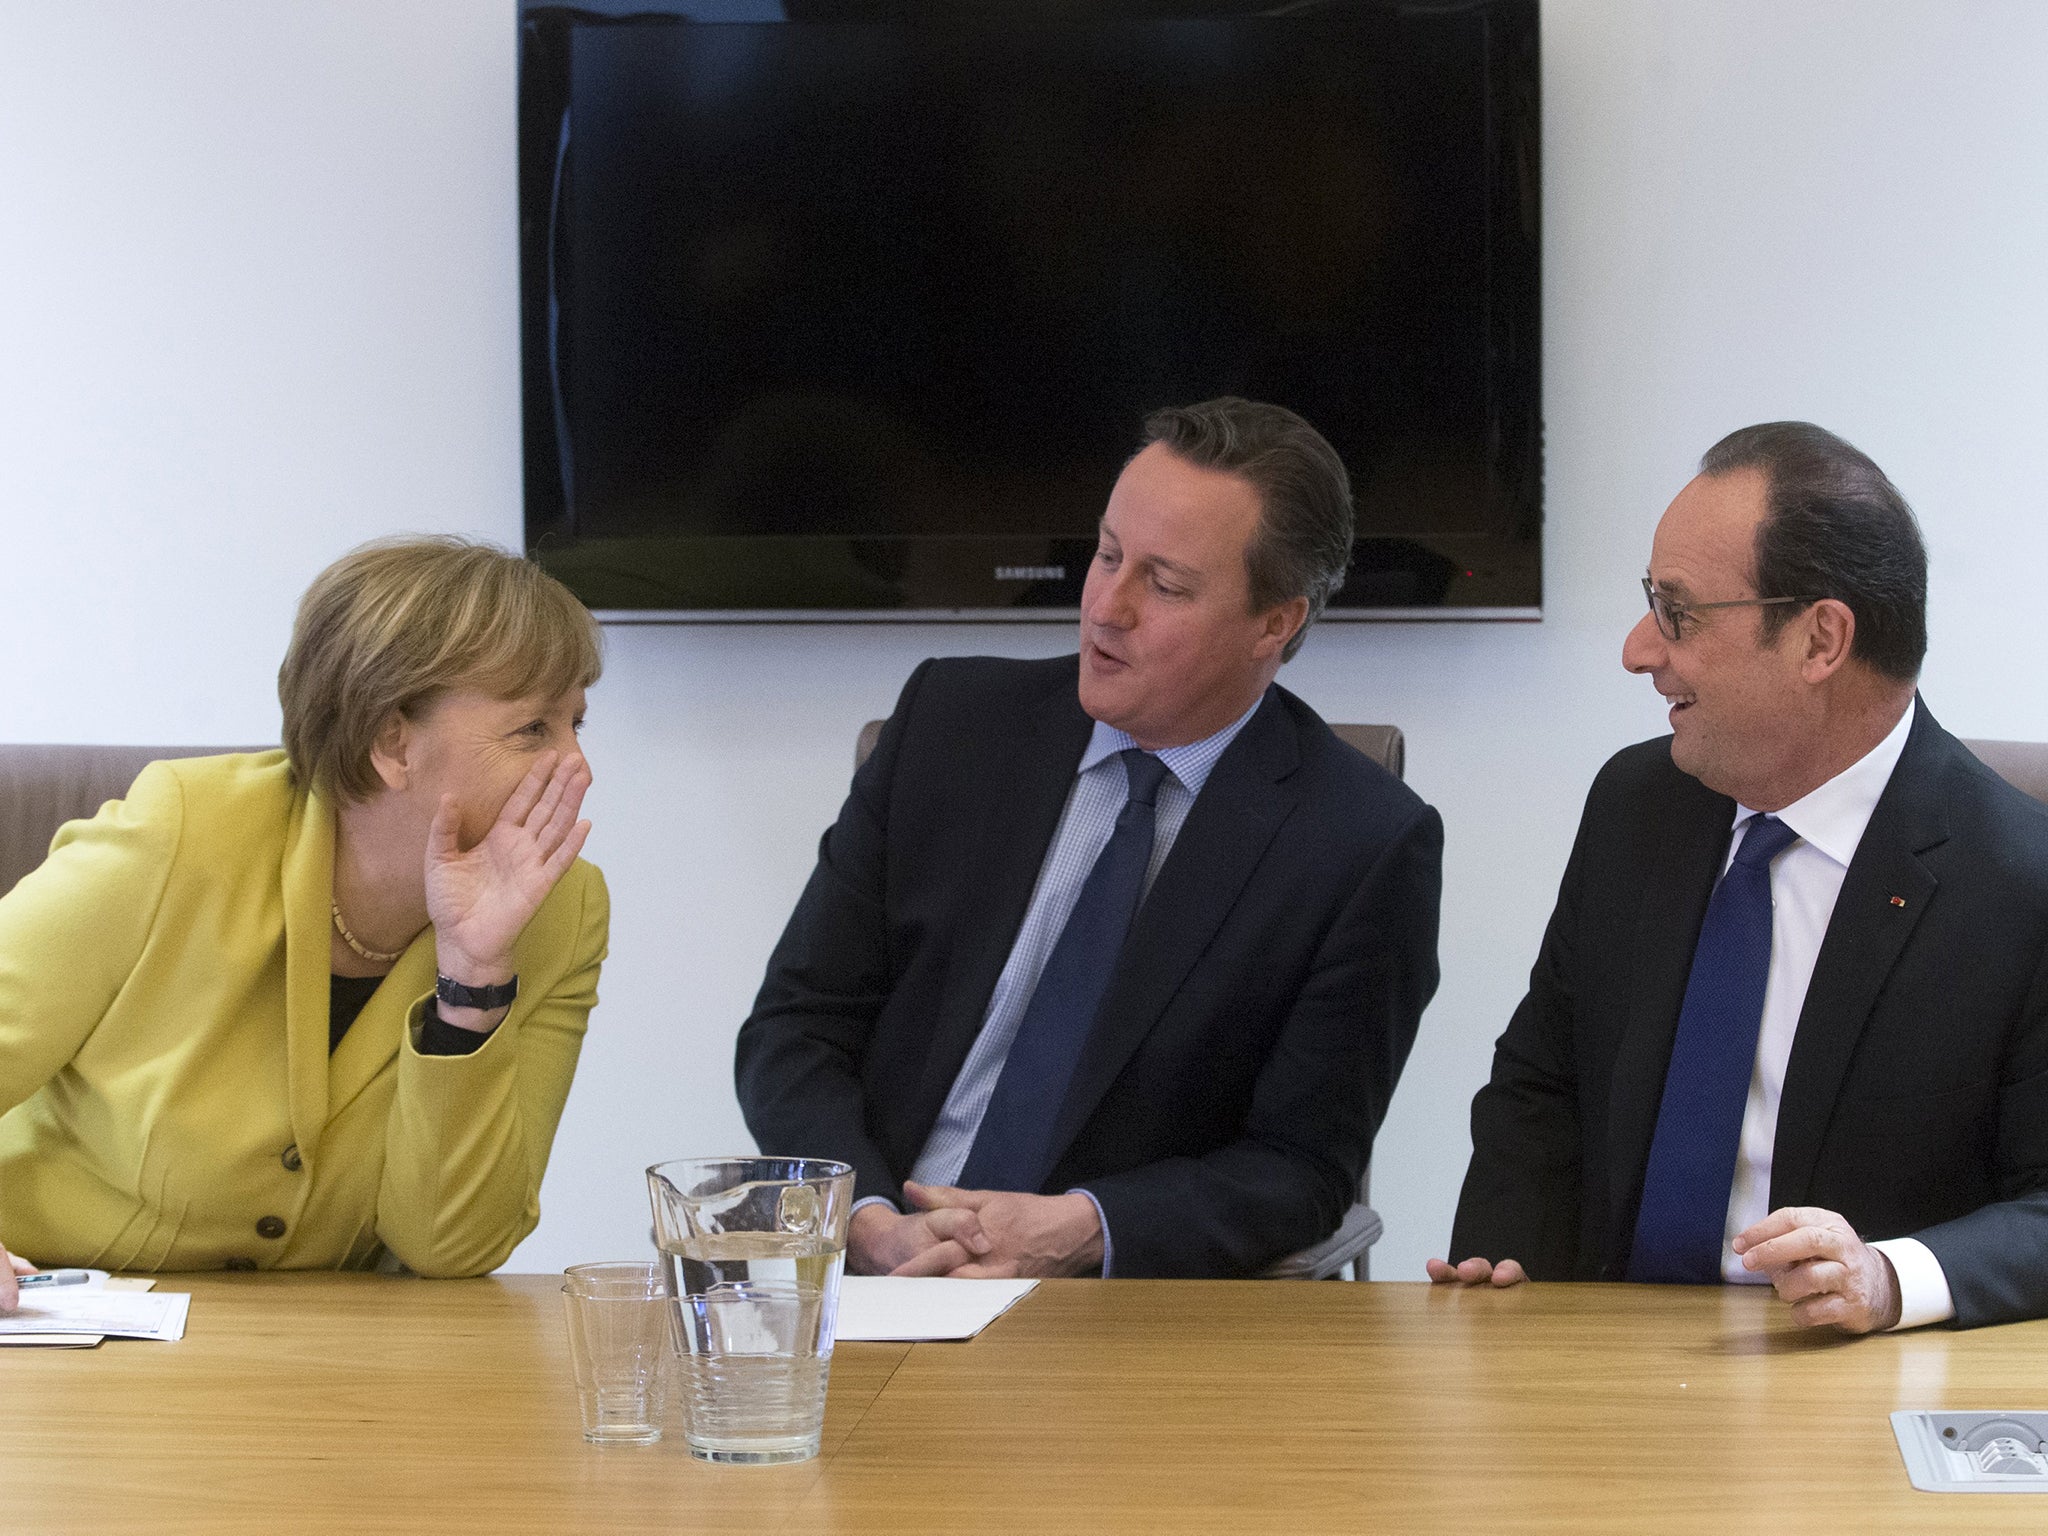 Germany's Chancellor Angela Merkel, Britain's Prime Minister David Cameron and France's President Francois Hollande attend a meeting during a European Union leaders summit on migration in Brussels, Belgium